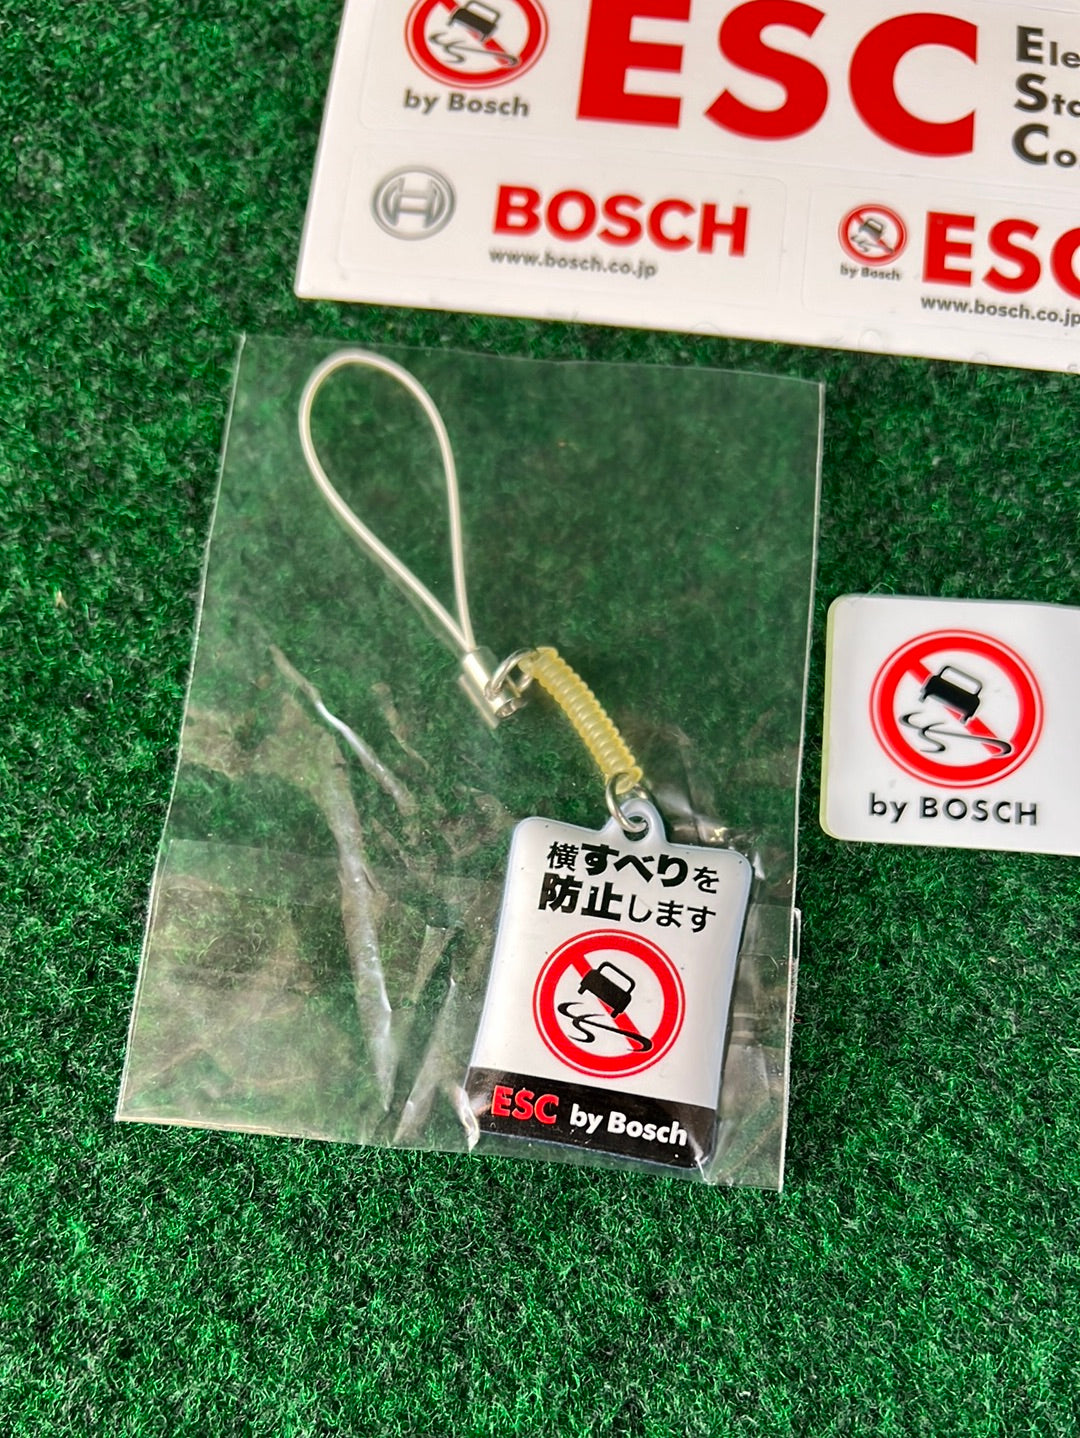 BOSCH Japan - Clean Diesel & Electric Stability Control Promotional Items & Stickers